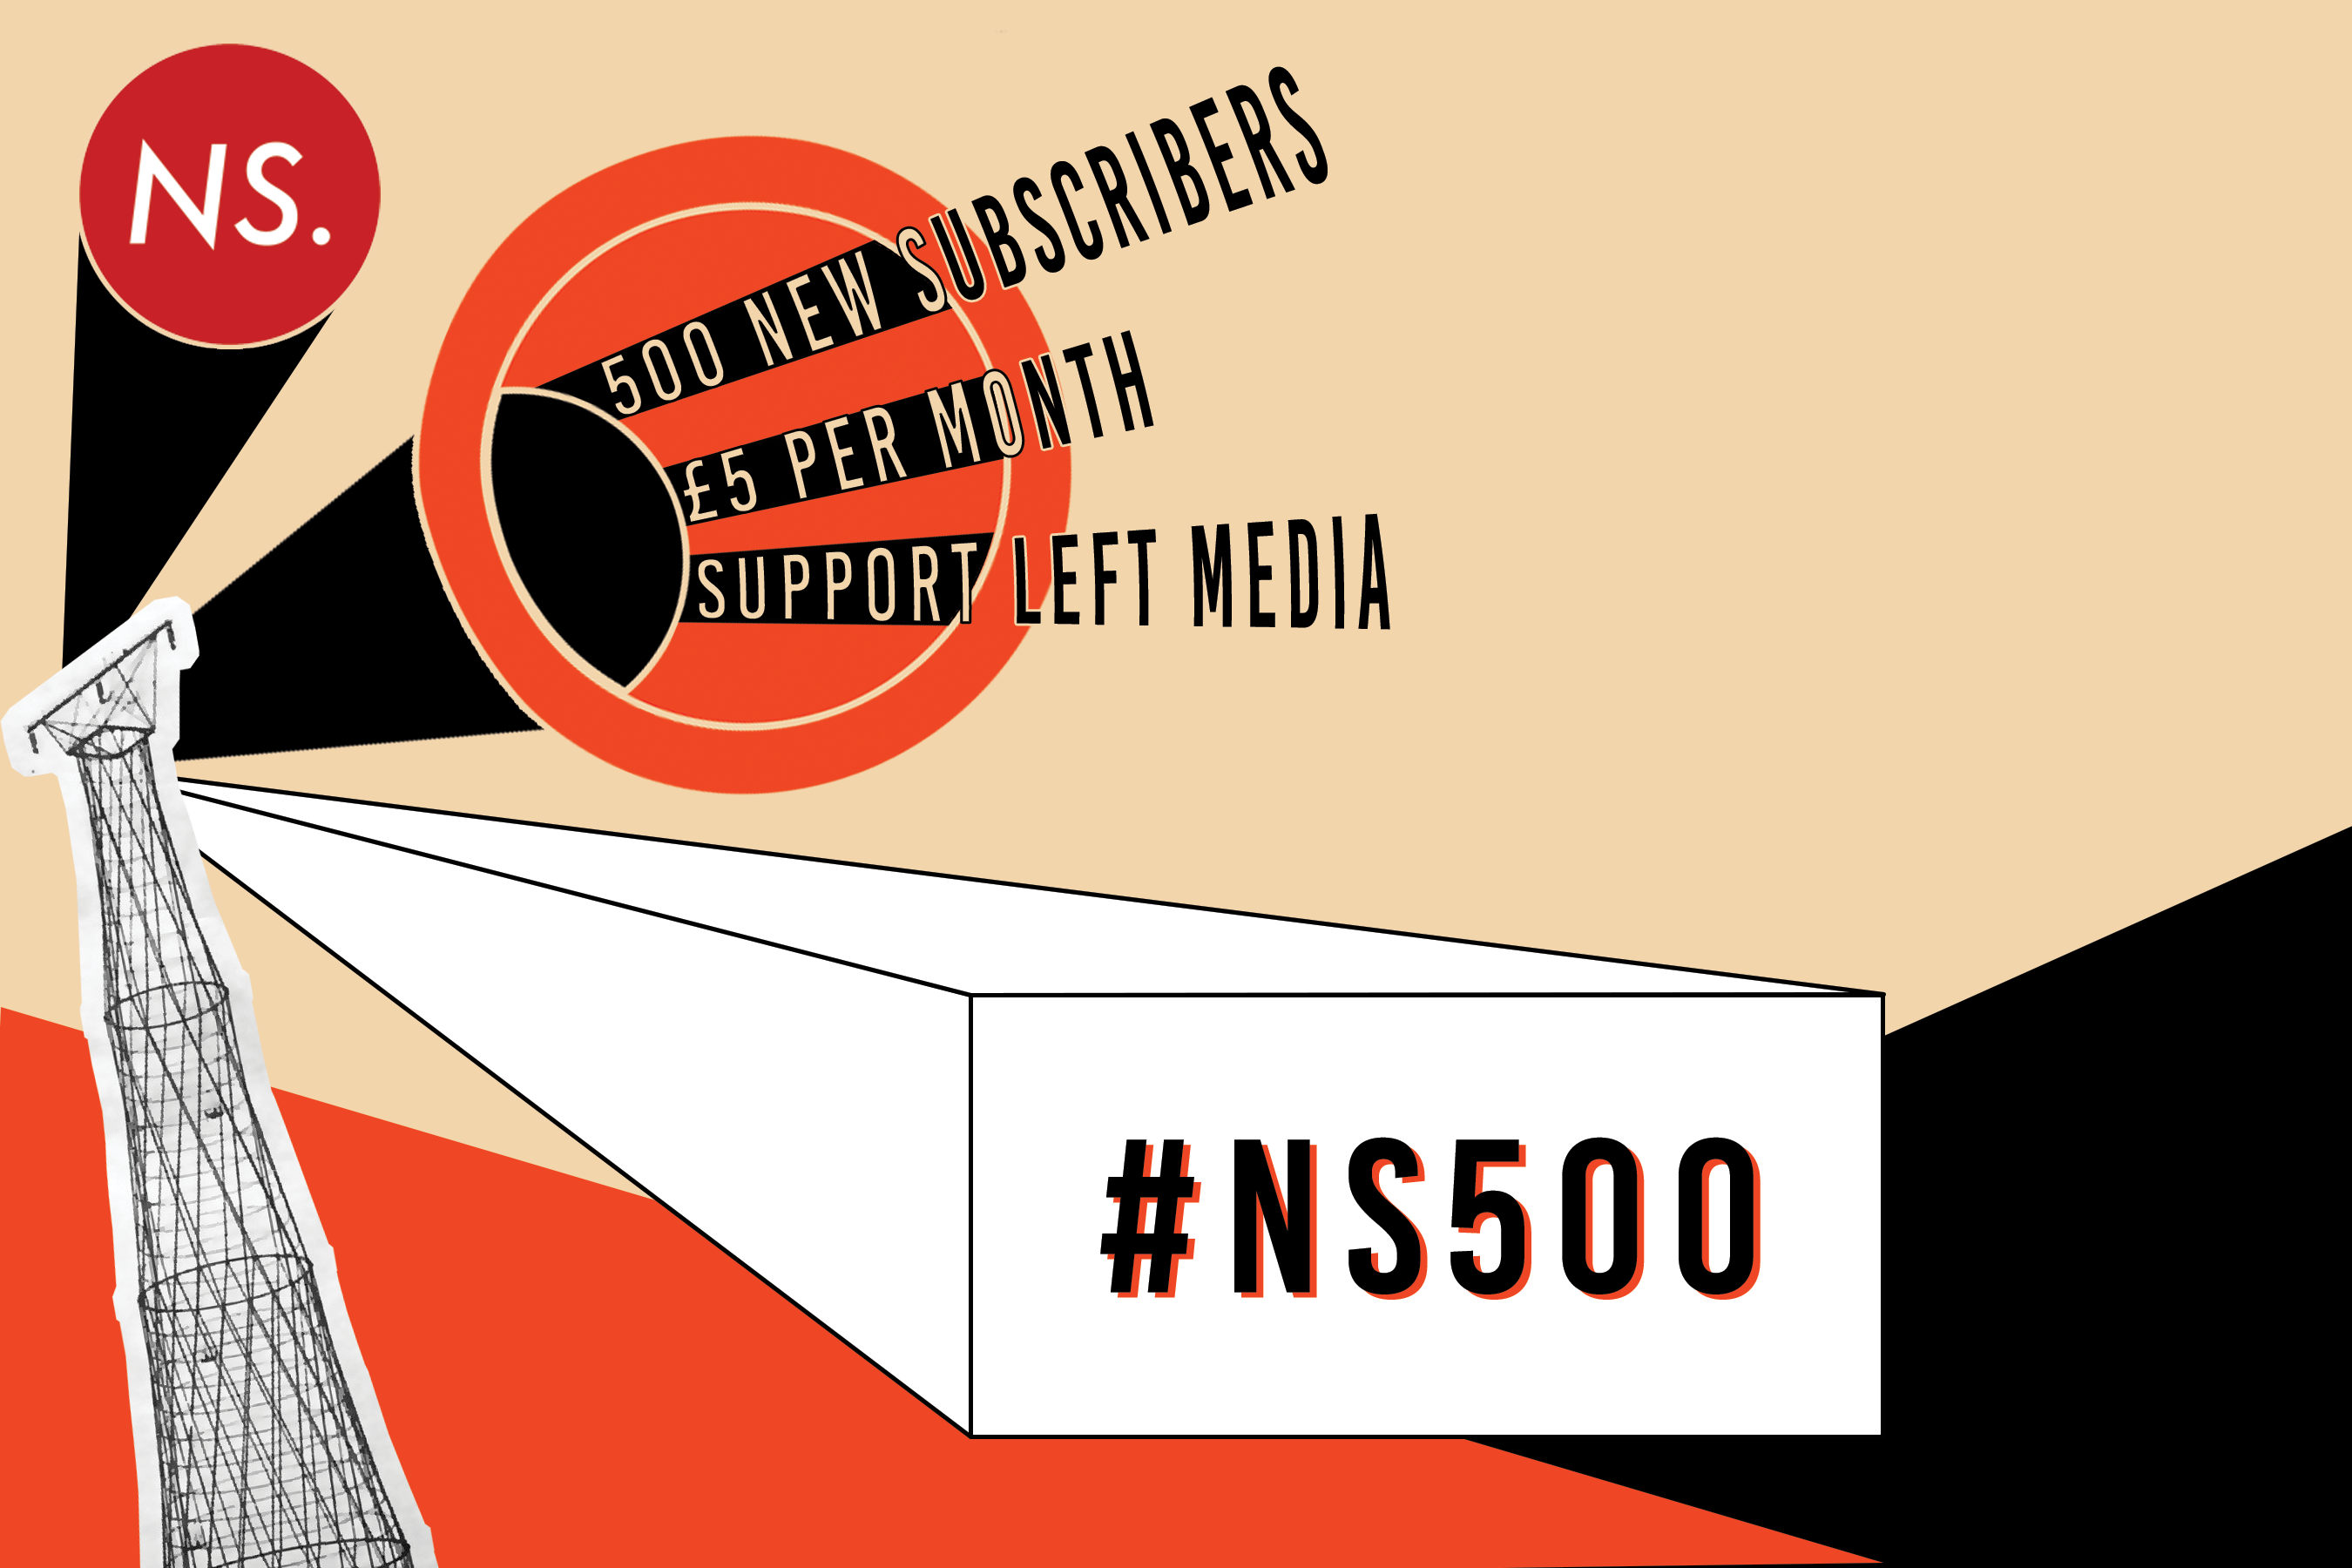 NS500: 500 more subscribers, £5 per month. Support left media!